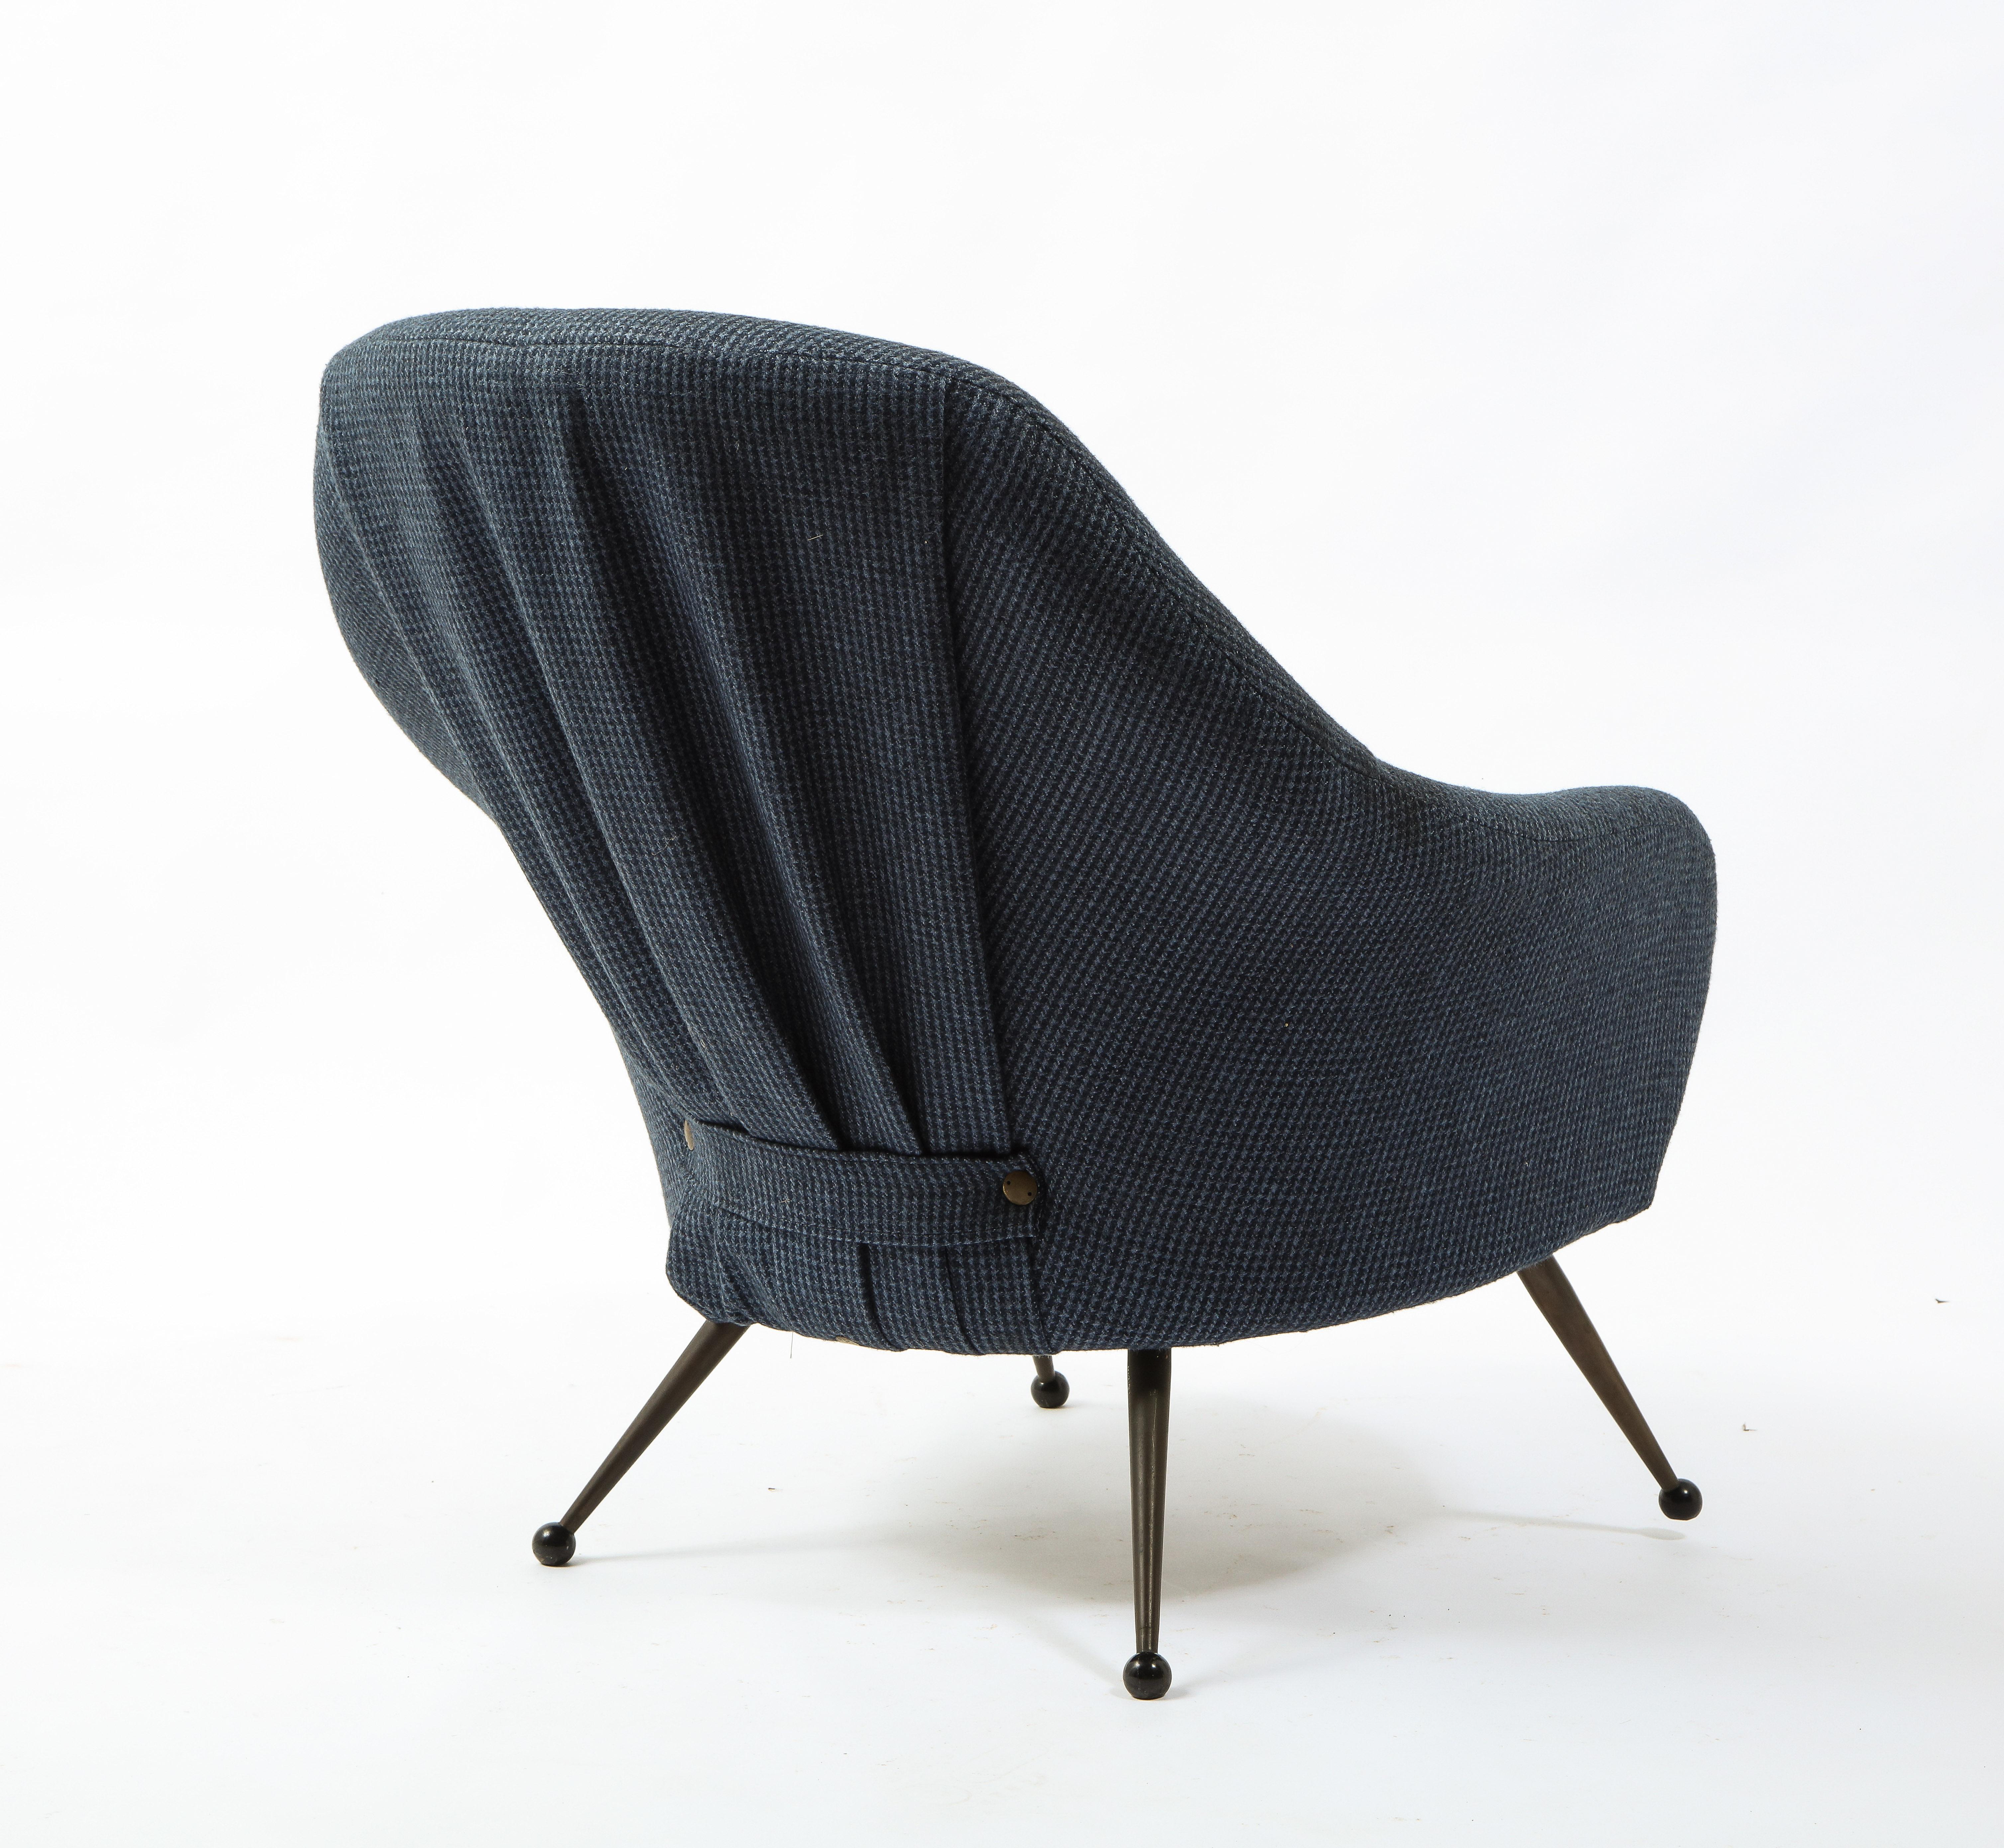 Marco Zanuso Single Martingala Armchair, Italy 1950's In Good Condition For Sale In New York, NY